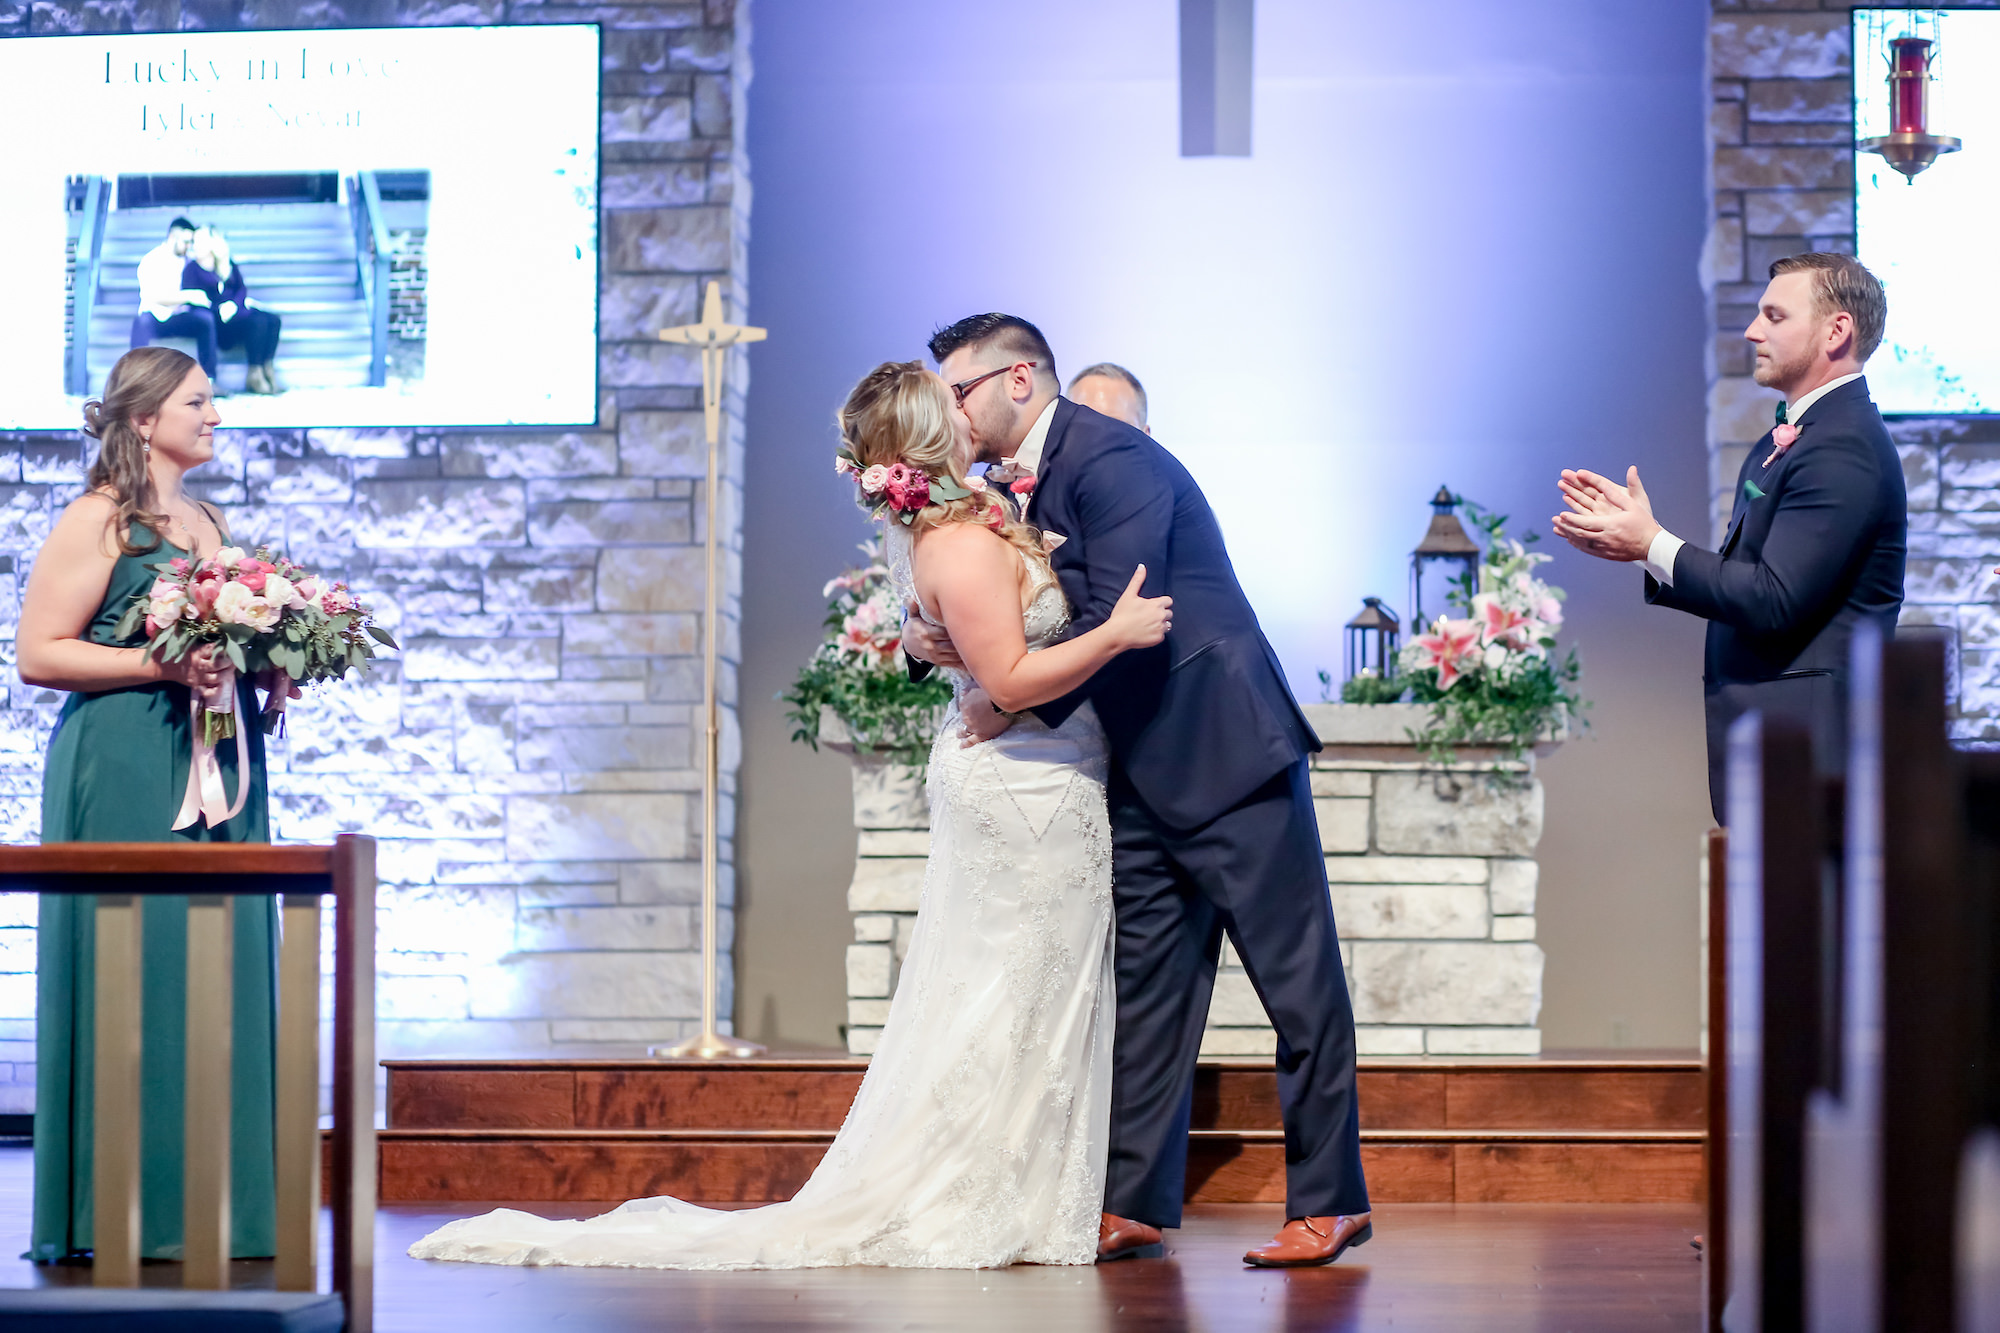 Florida Bride and Groom Kiss at the Alter, Bride Wearing Sleeveless Maggie Sottero Wedding Dress | Florida Wedding Photographer Lifelong Photography Studios